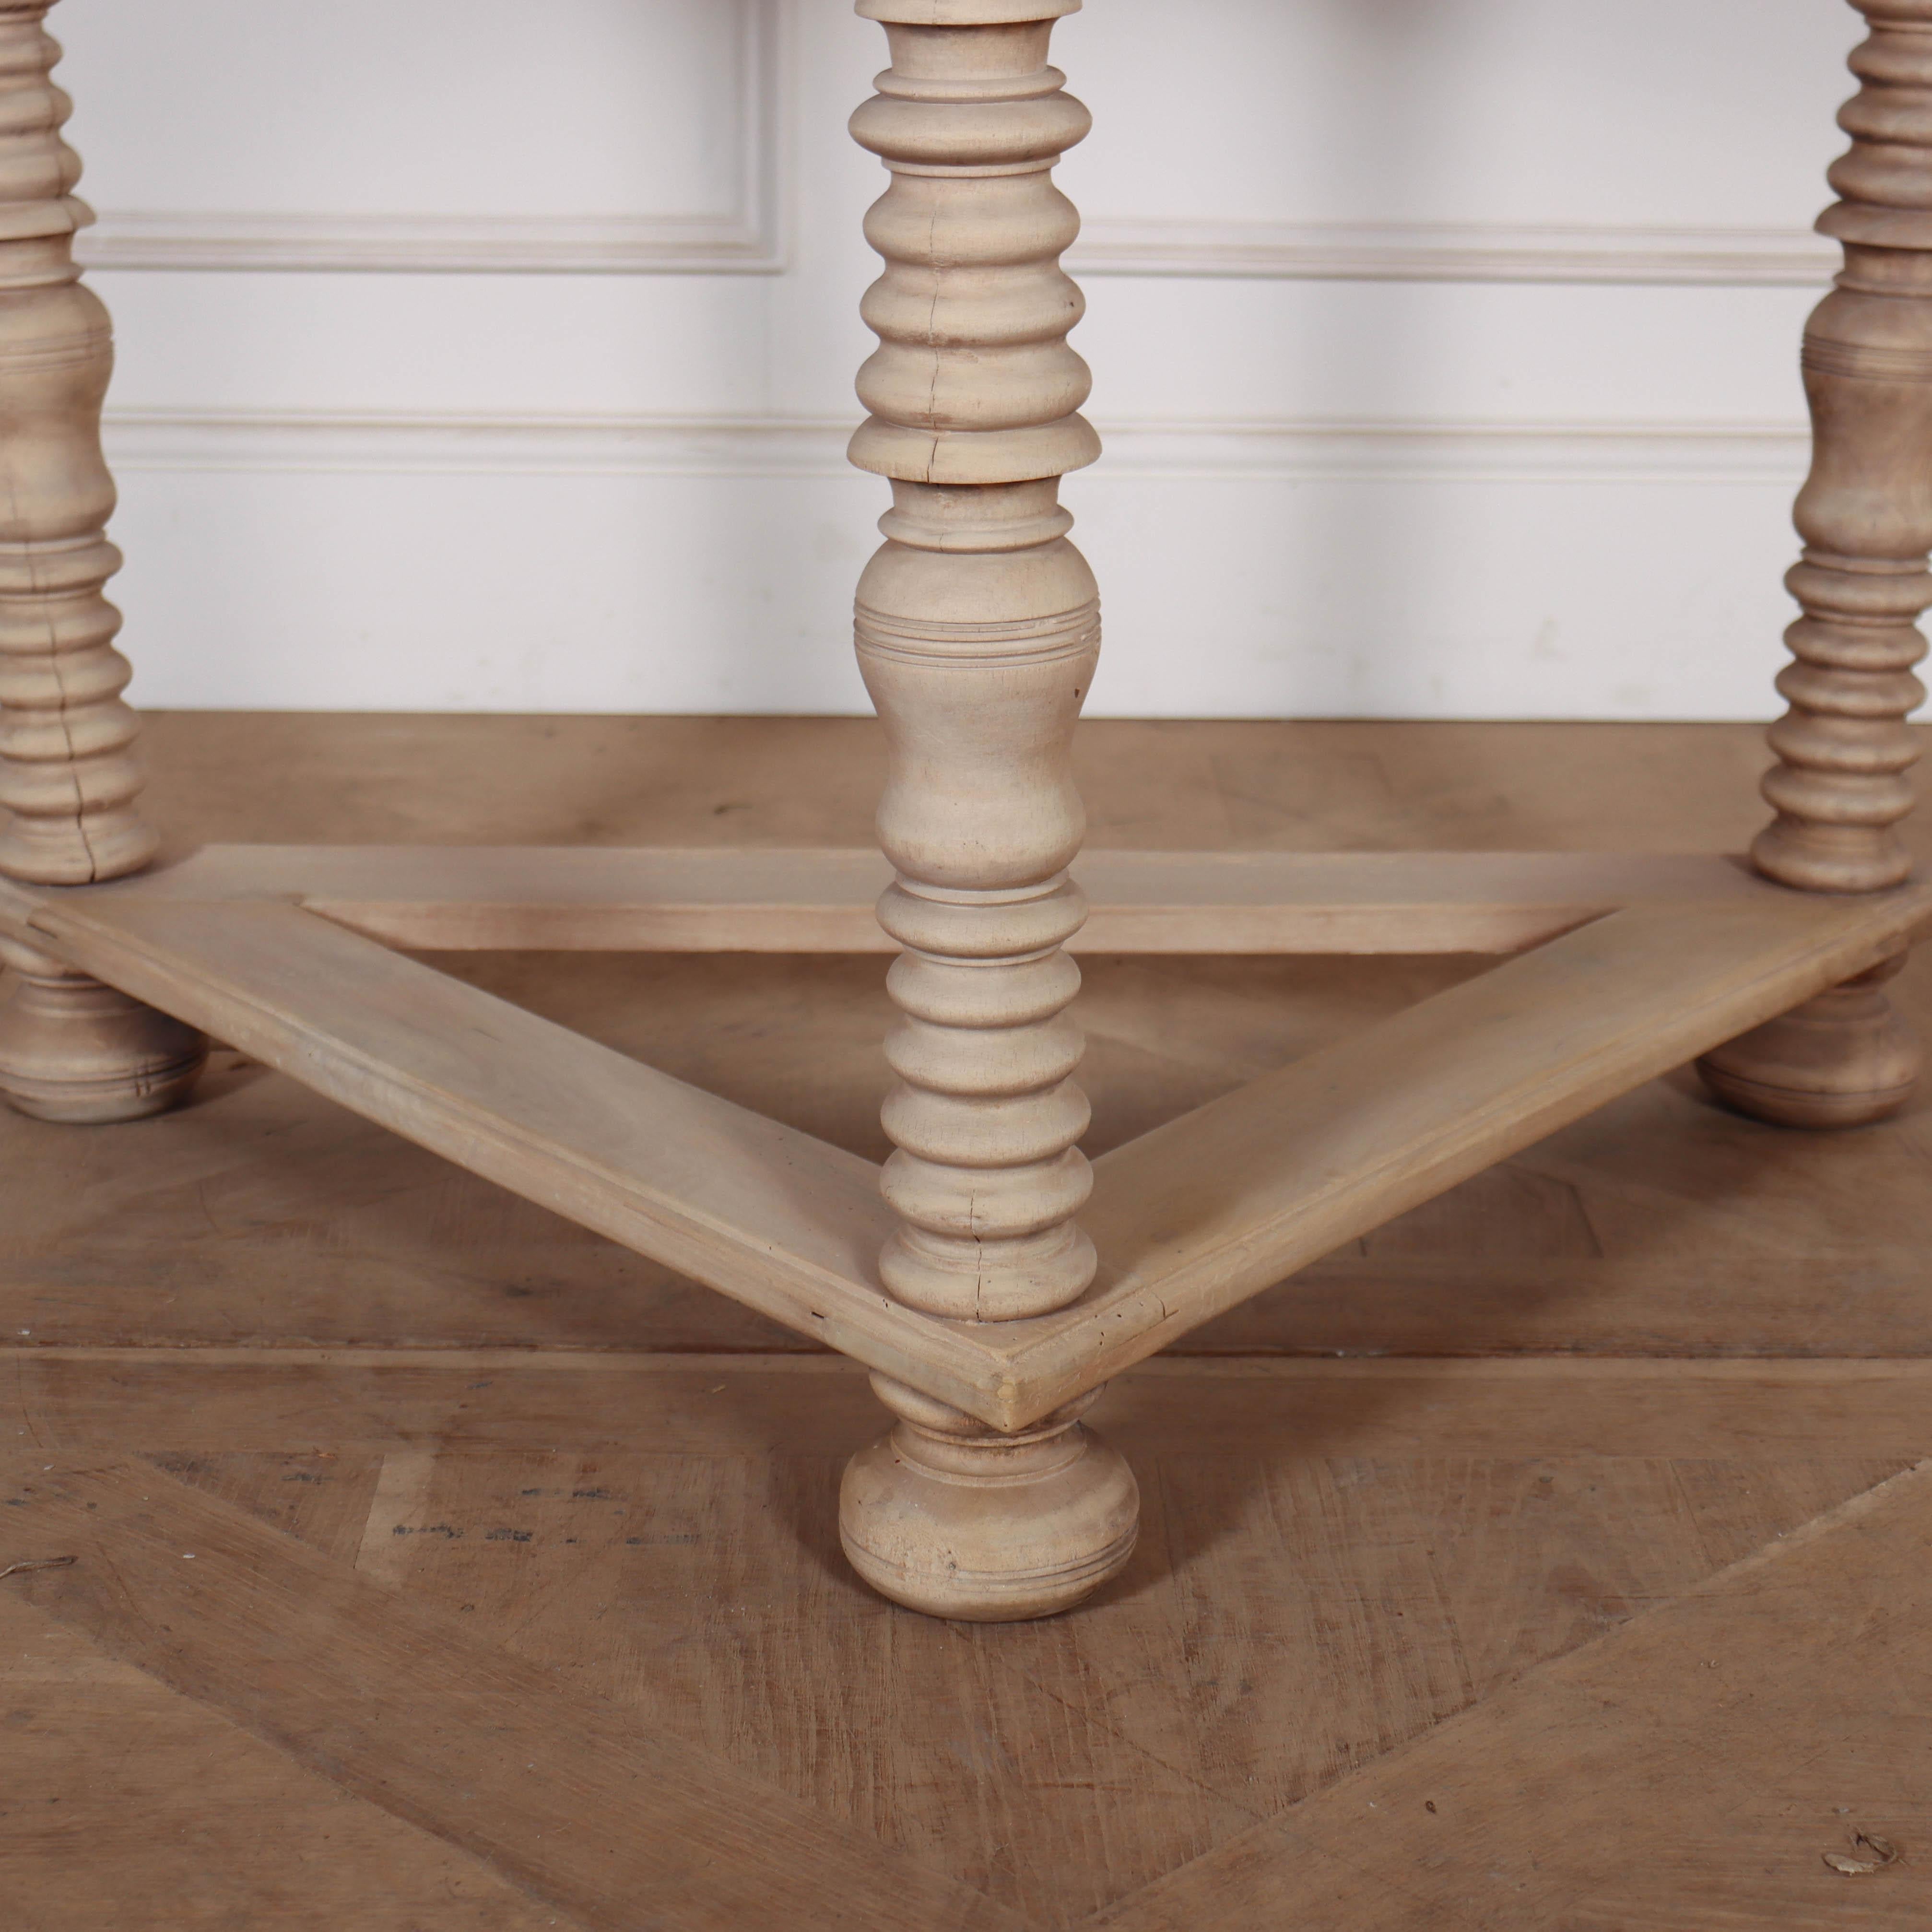 Early 19th C Dutch bleached carved walnut console table. 1880.

Dimensions
39 inches (99 cms) Wide
23.5 inches (60 cms) Deep
31.5 inches (80 cms) High.